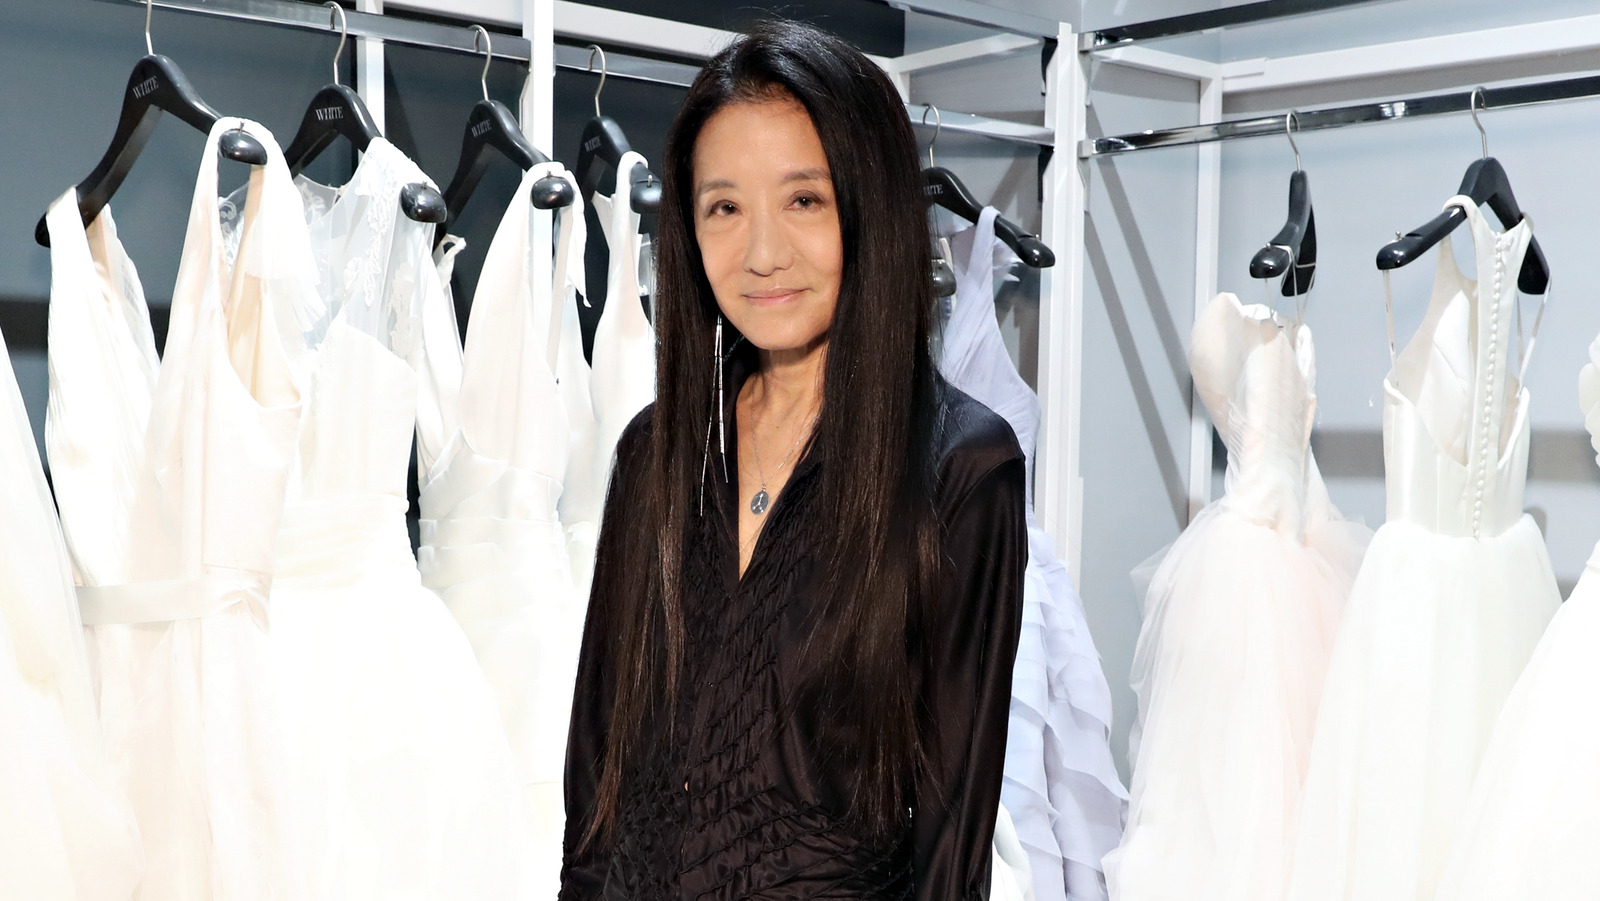 Vera Wang's Journey To Being The Biggest Name In Wedding Dress Design